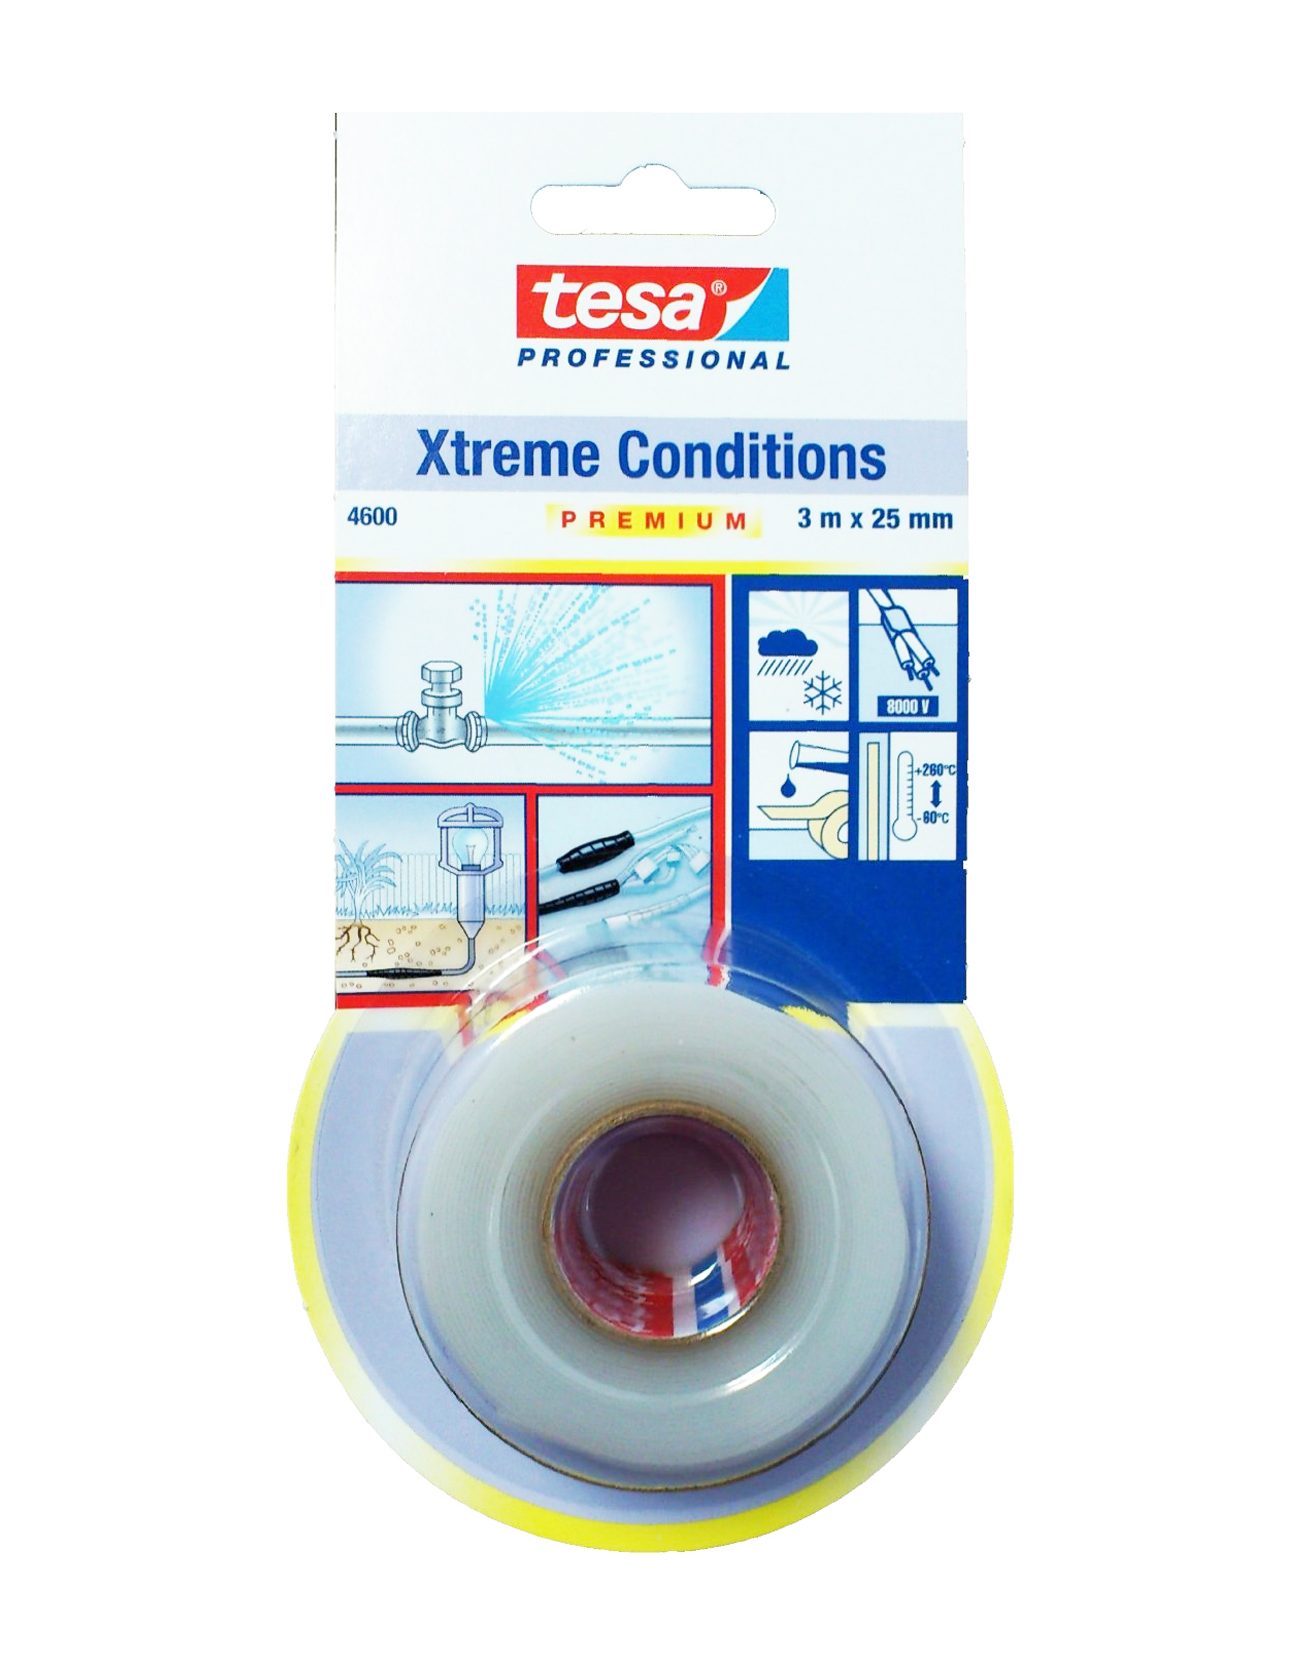 Xtreme conditions 3x25